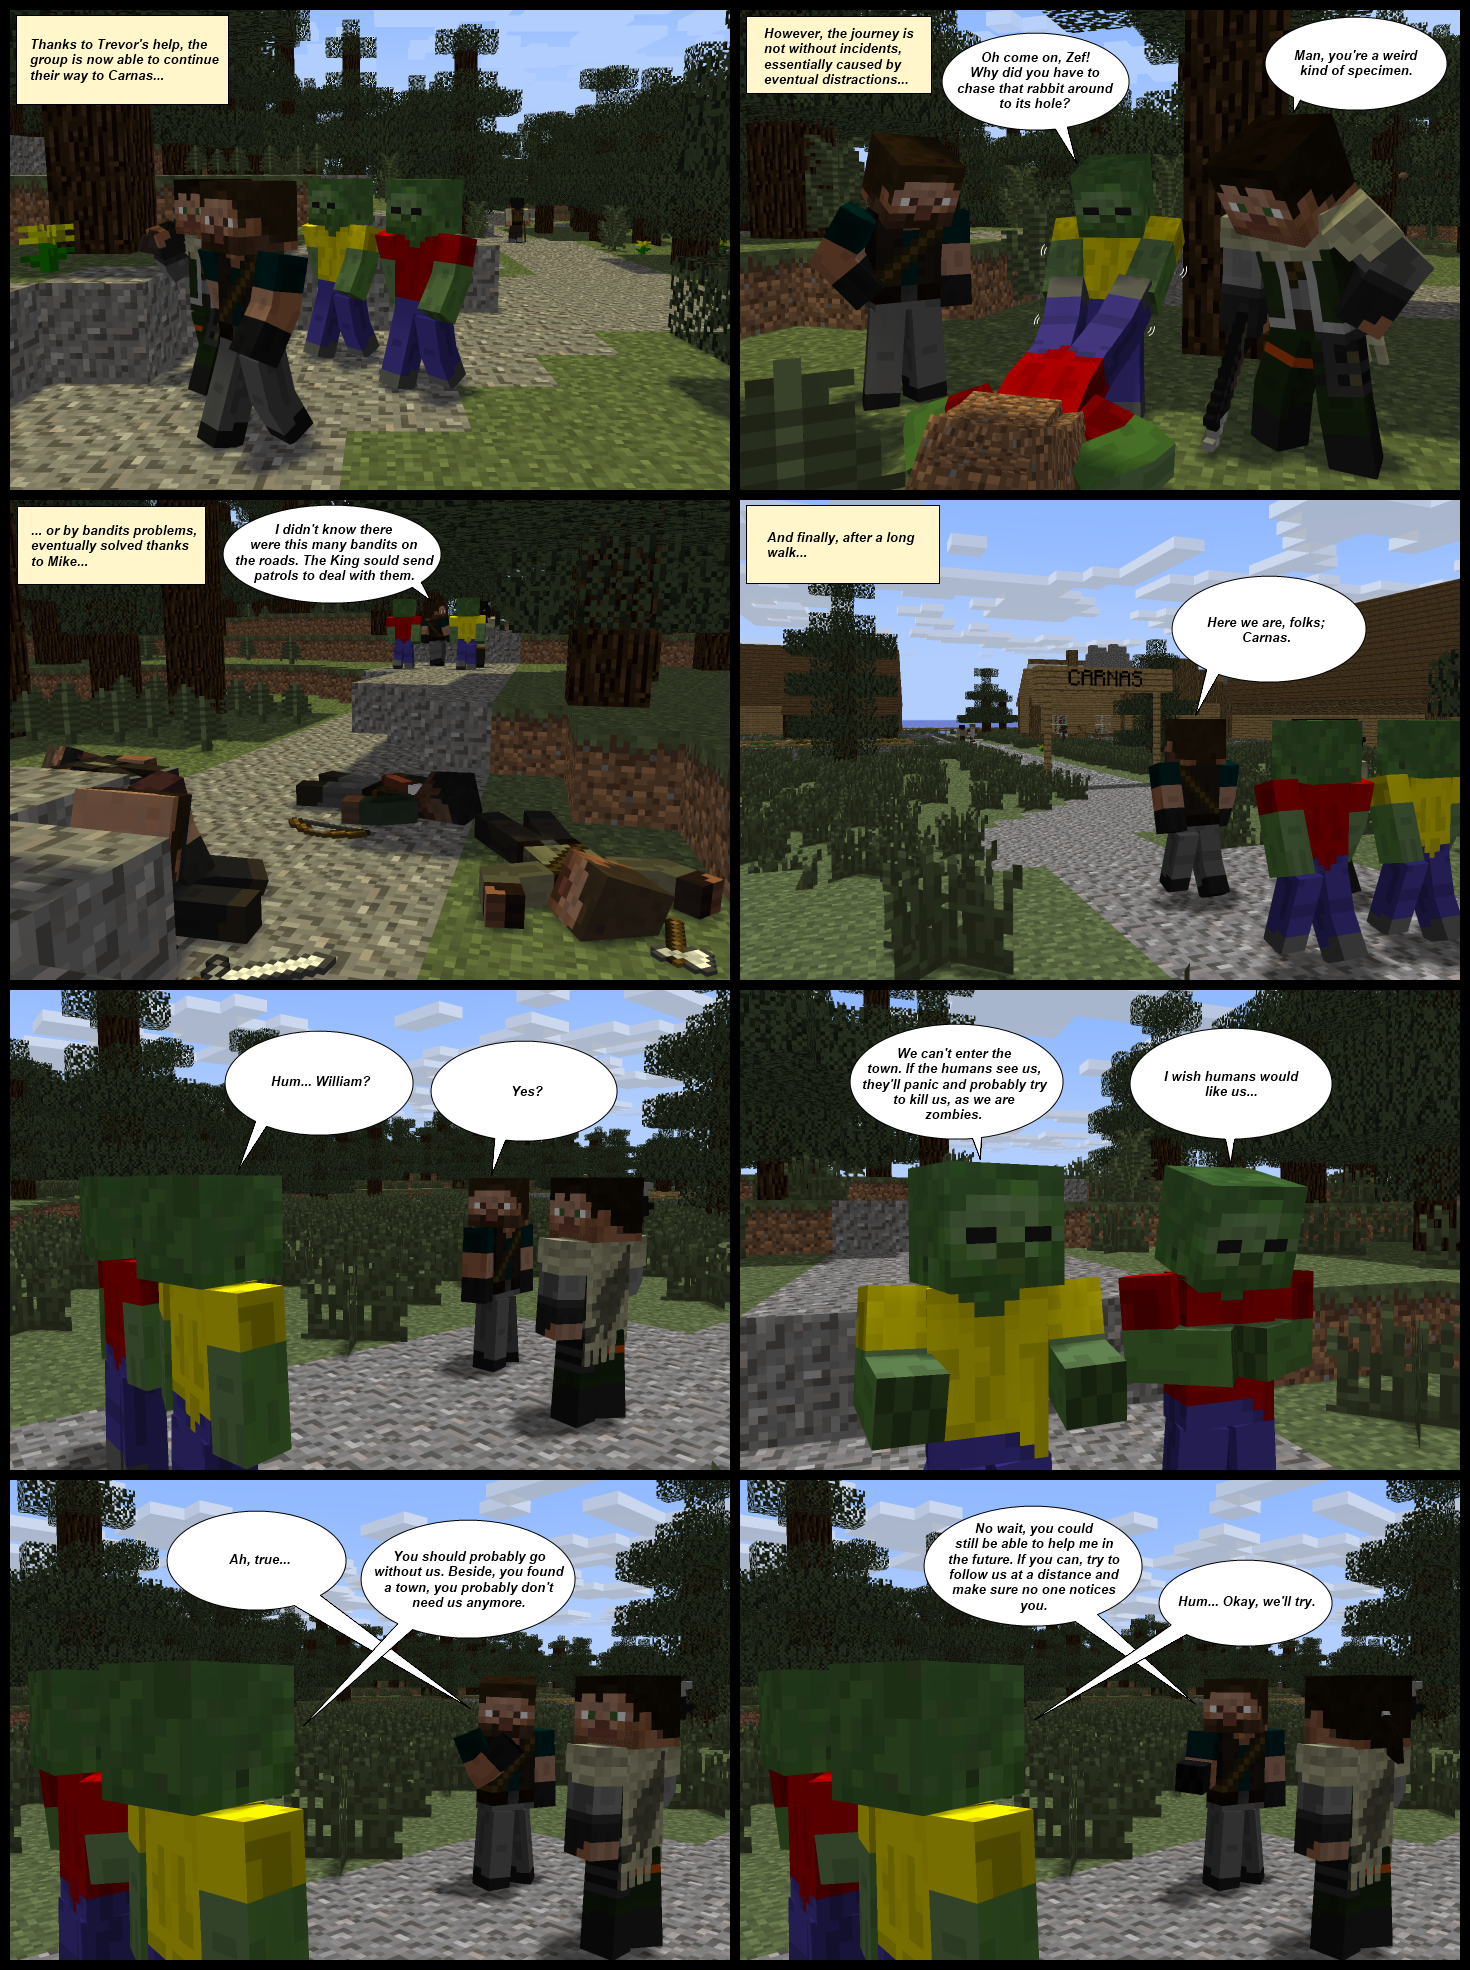 [Comic] Herobrine - Part 10 - Wallpapers and art - Mine-imator forums